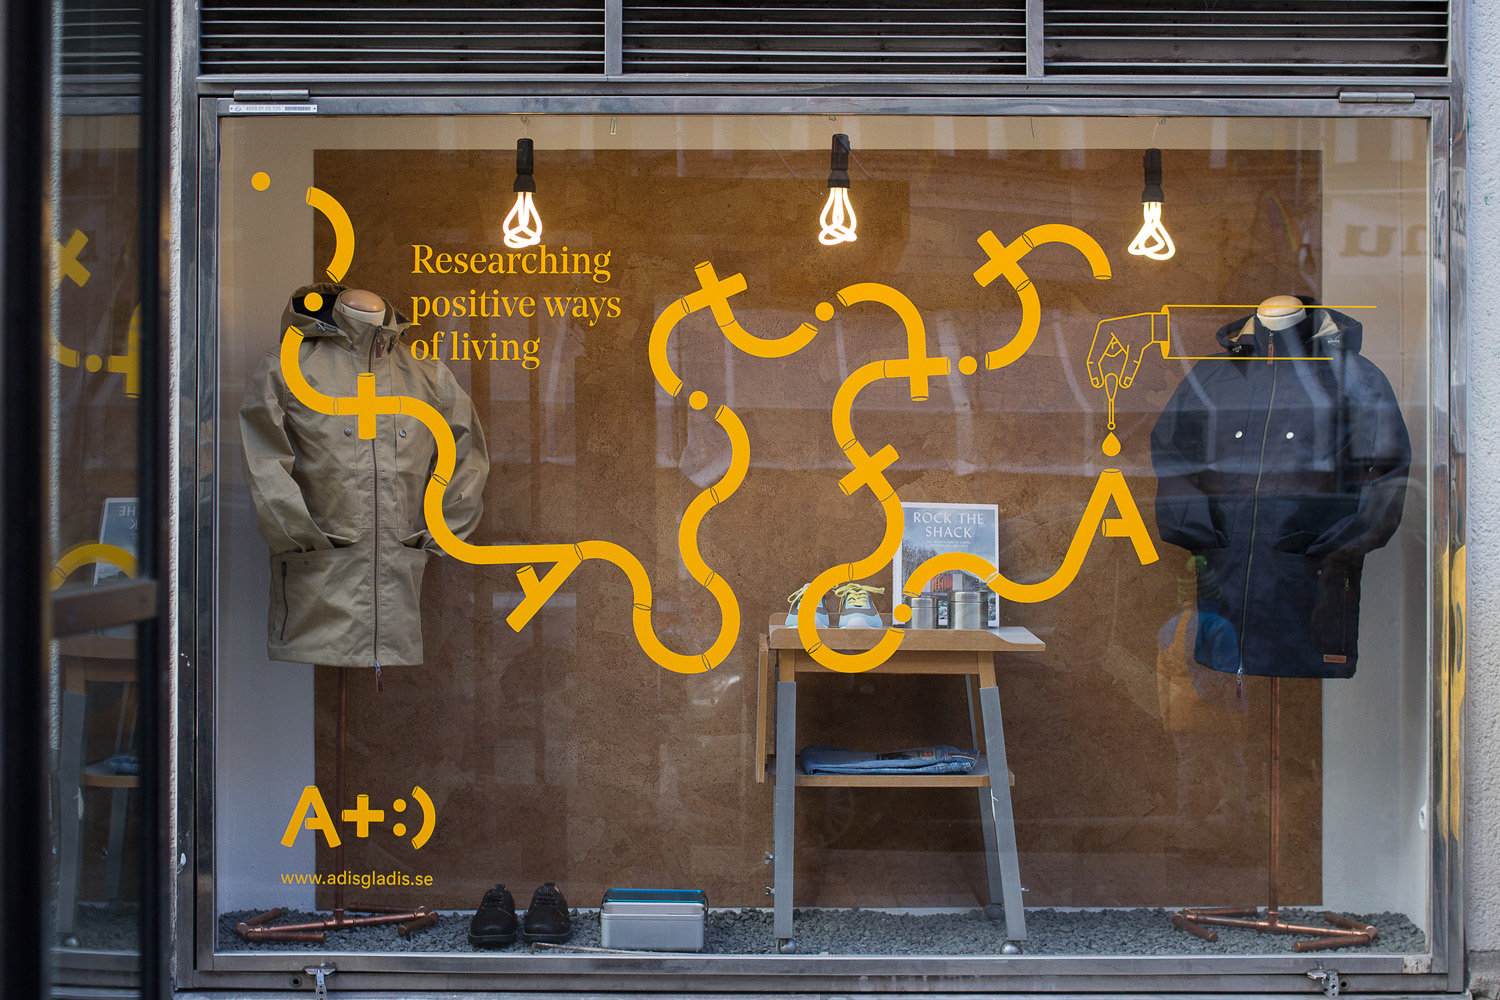 Visual identity and widow decals designed by Bedow for Swedish clothing and gadget retailer Adisgladis